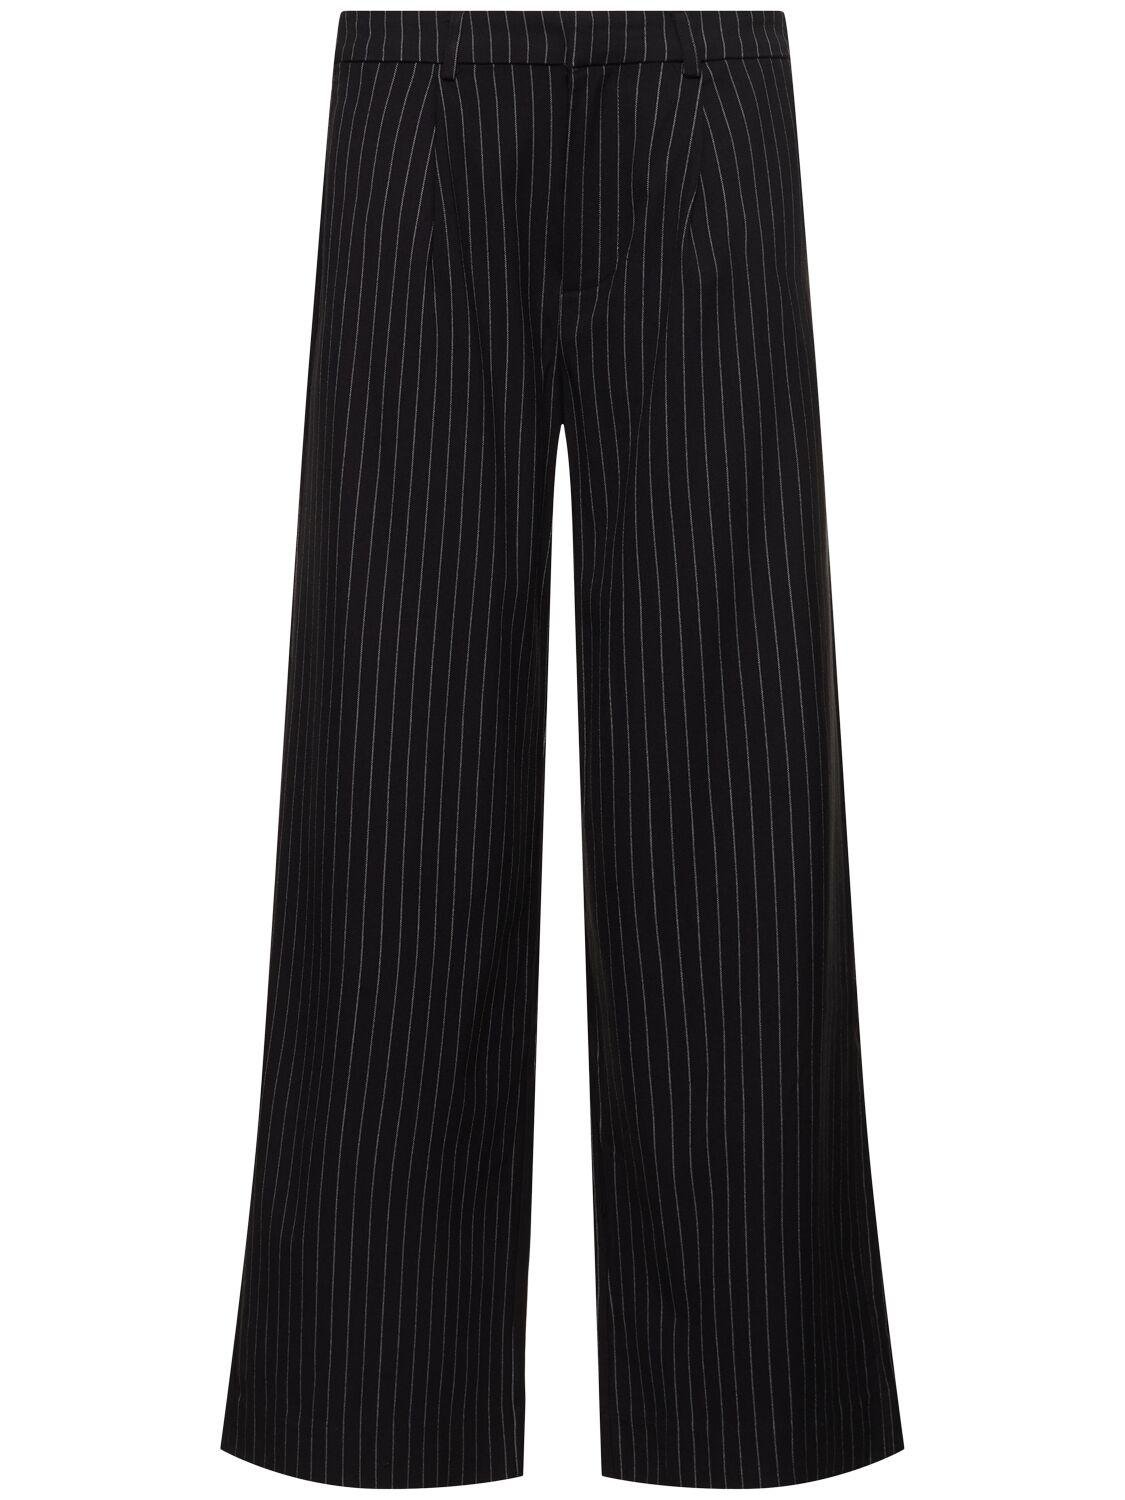 Low Rise Pinstriped Tech Pants by WEWOREWHAT